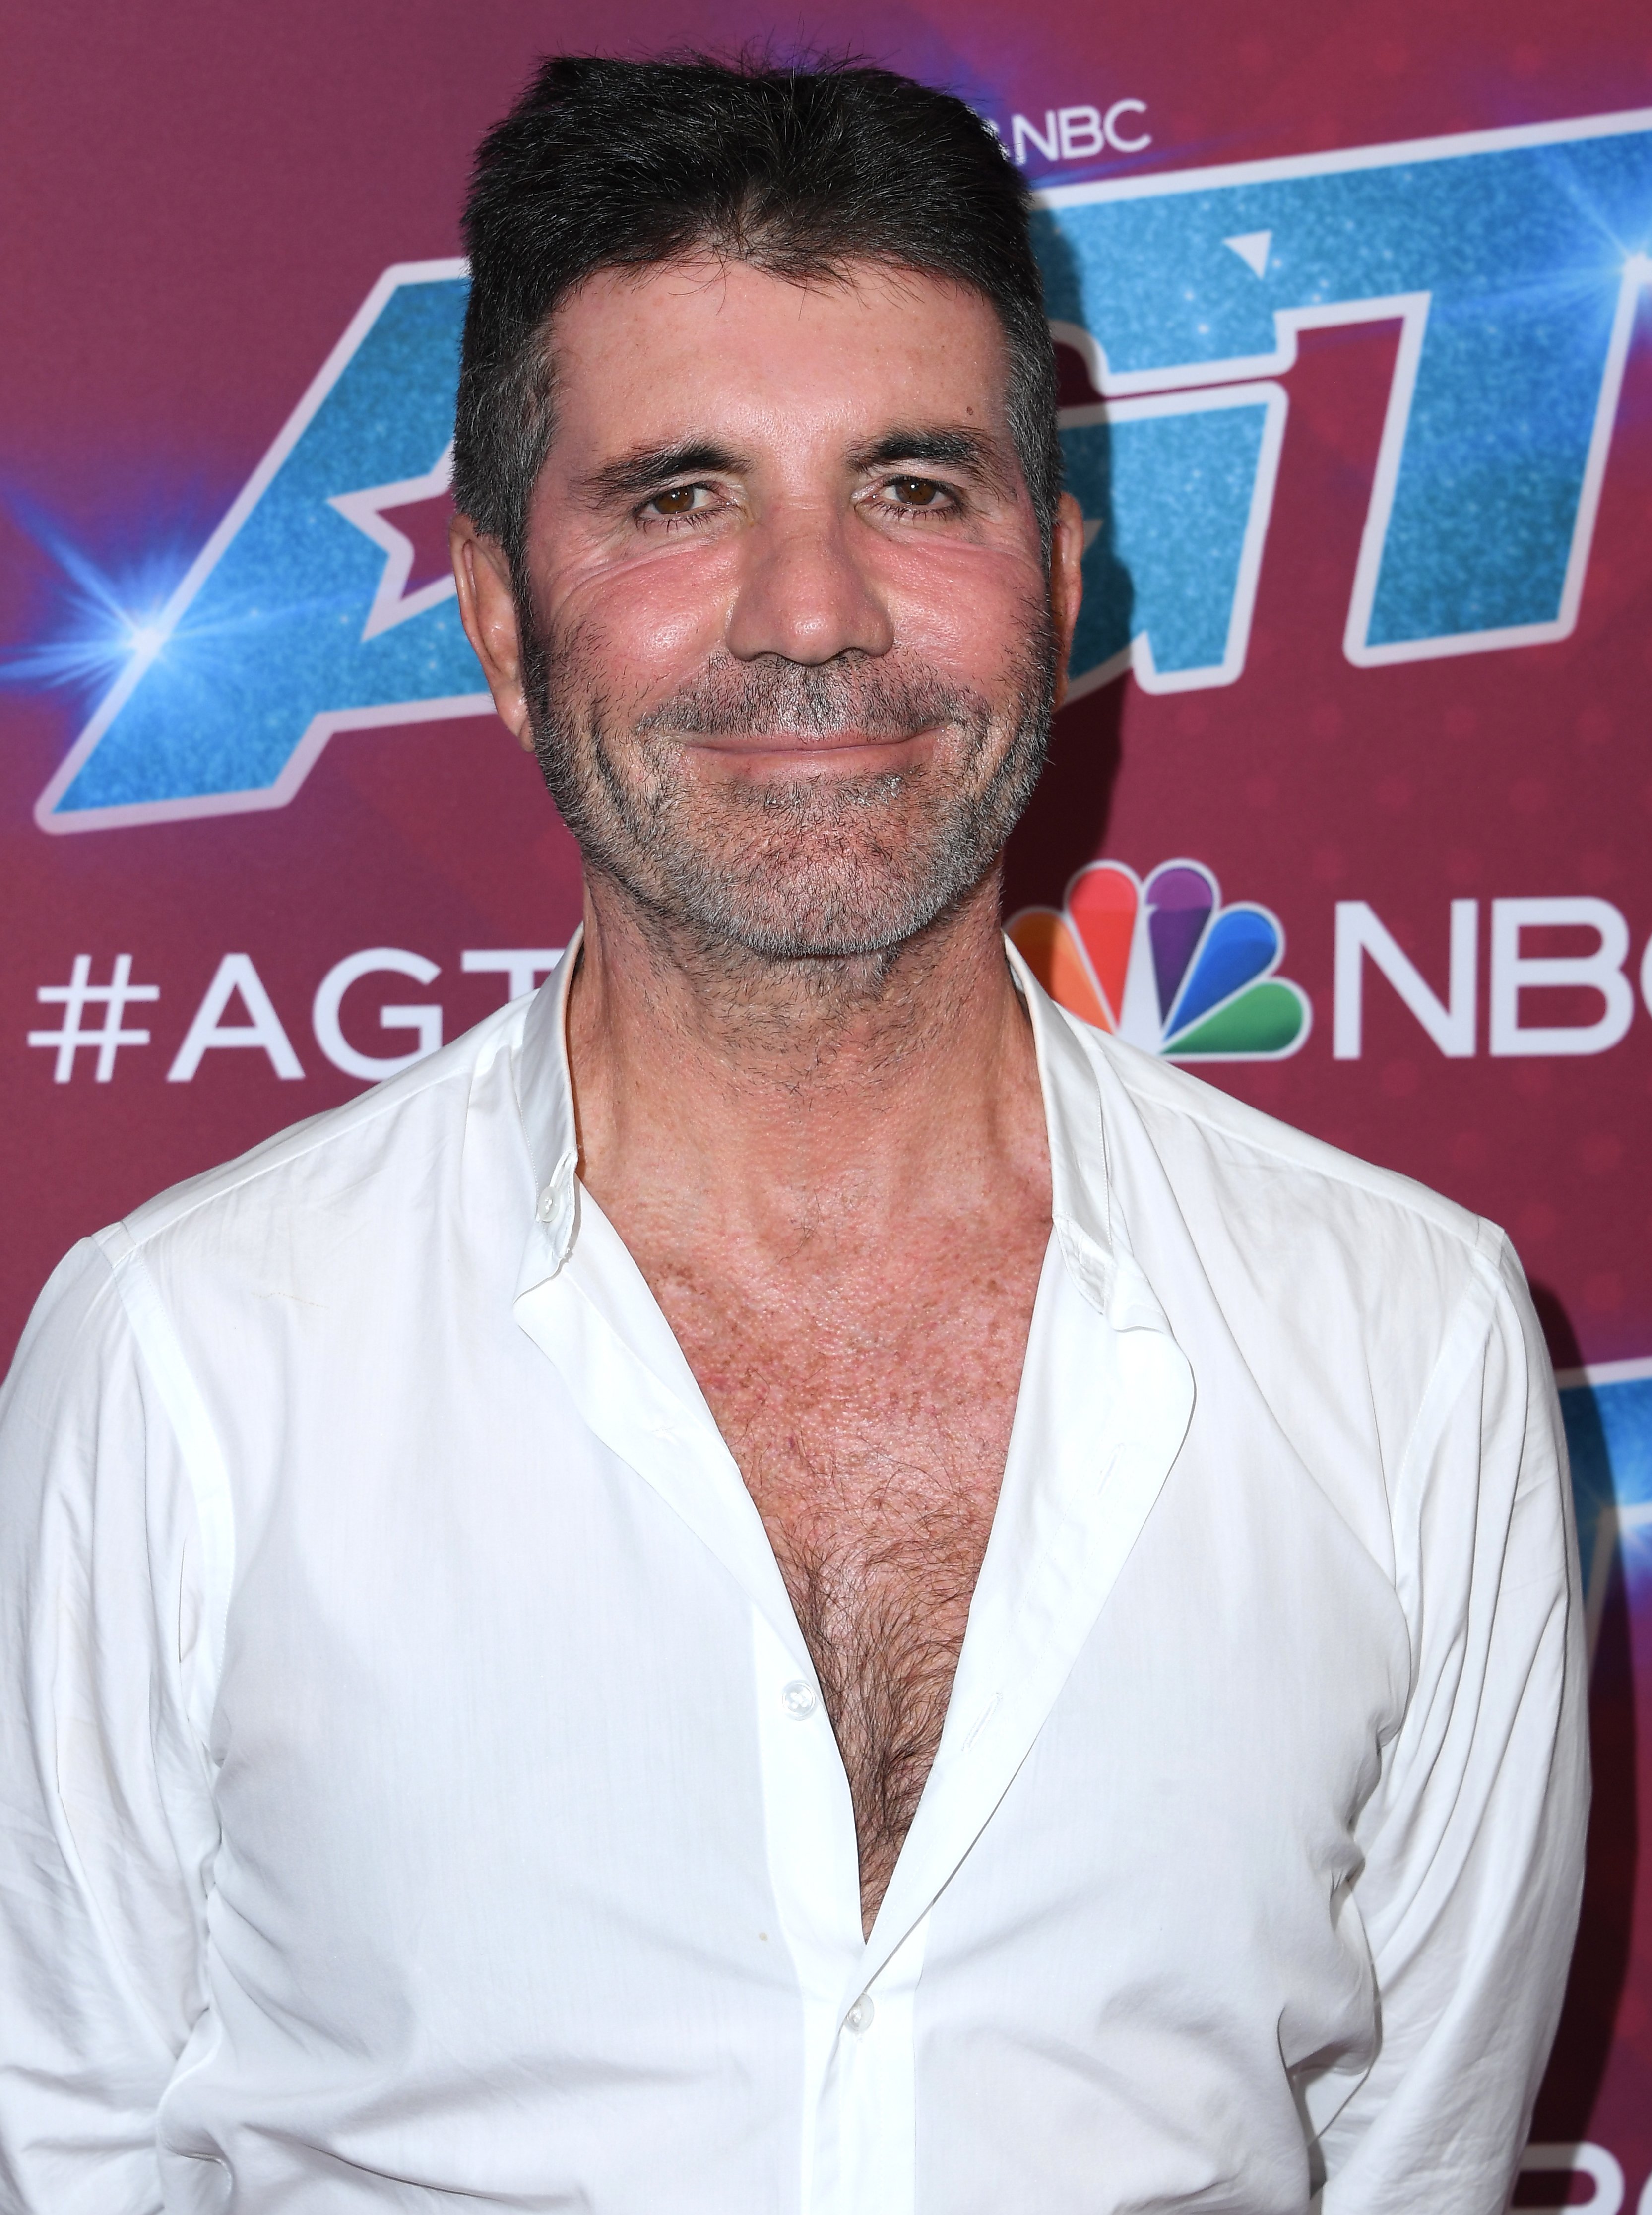 Simon Cowell arrives at the Red Carpet For "America's Got Talent" Season 17 Finale at Sheraton Pasadena Hotel on September 14, 2022 in Pasadena, California | Source: Getty Images 